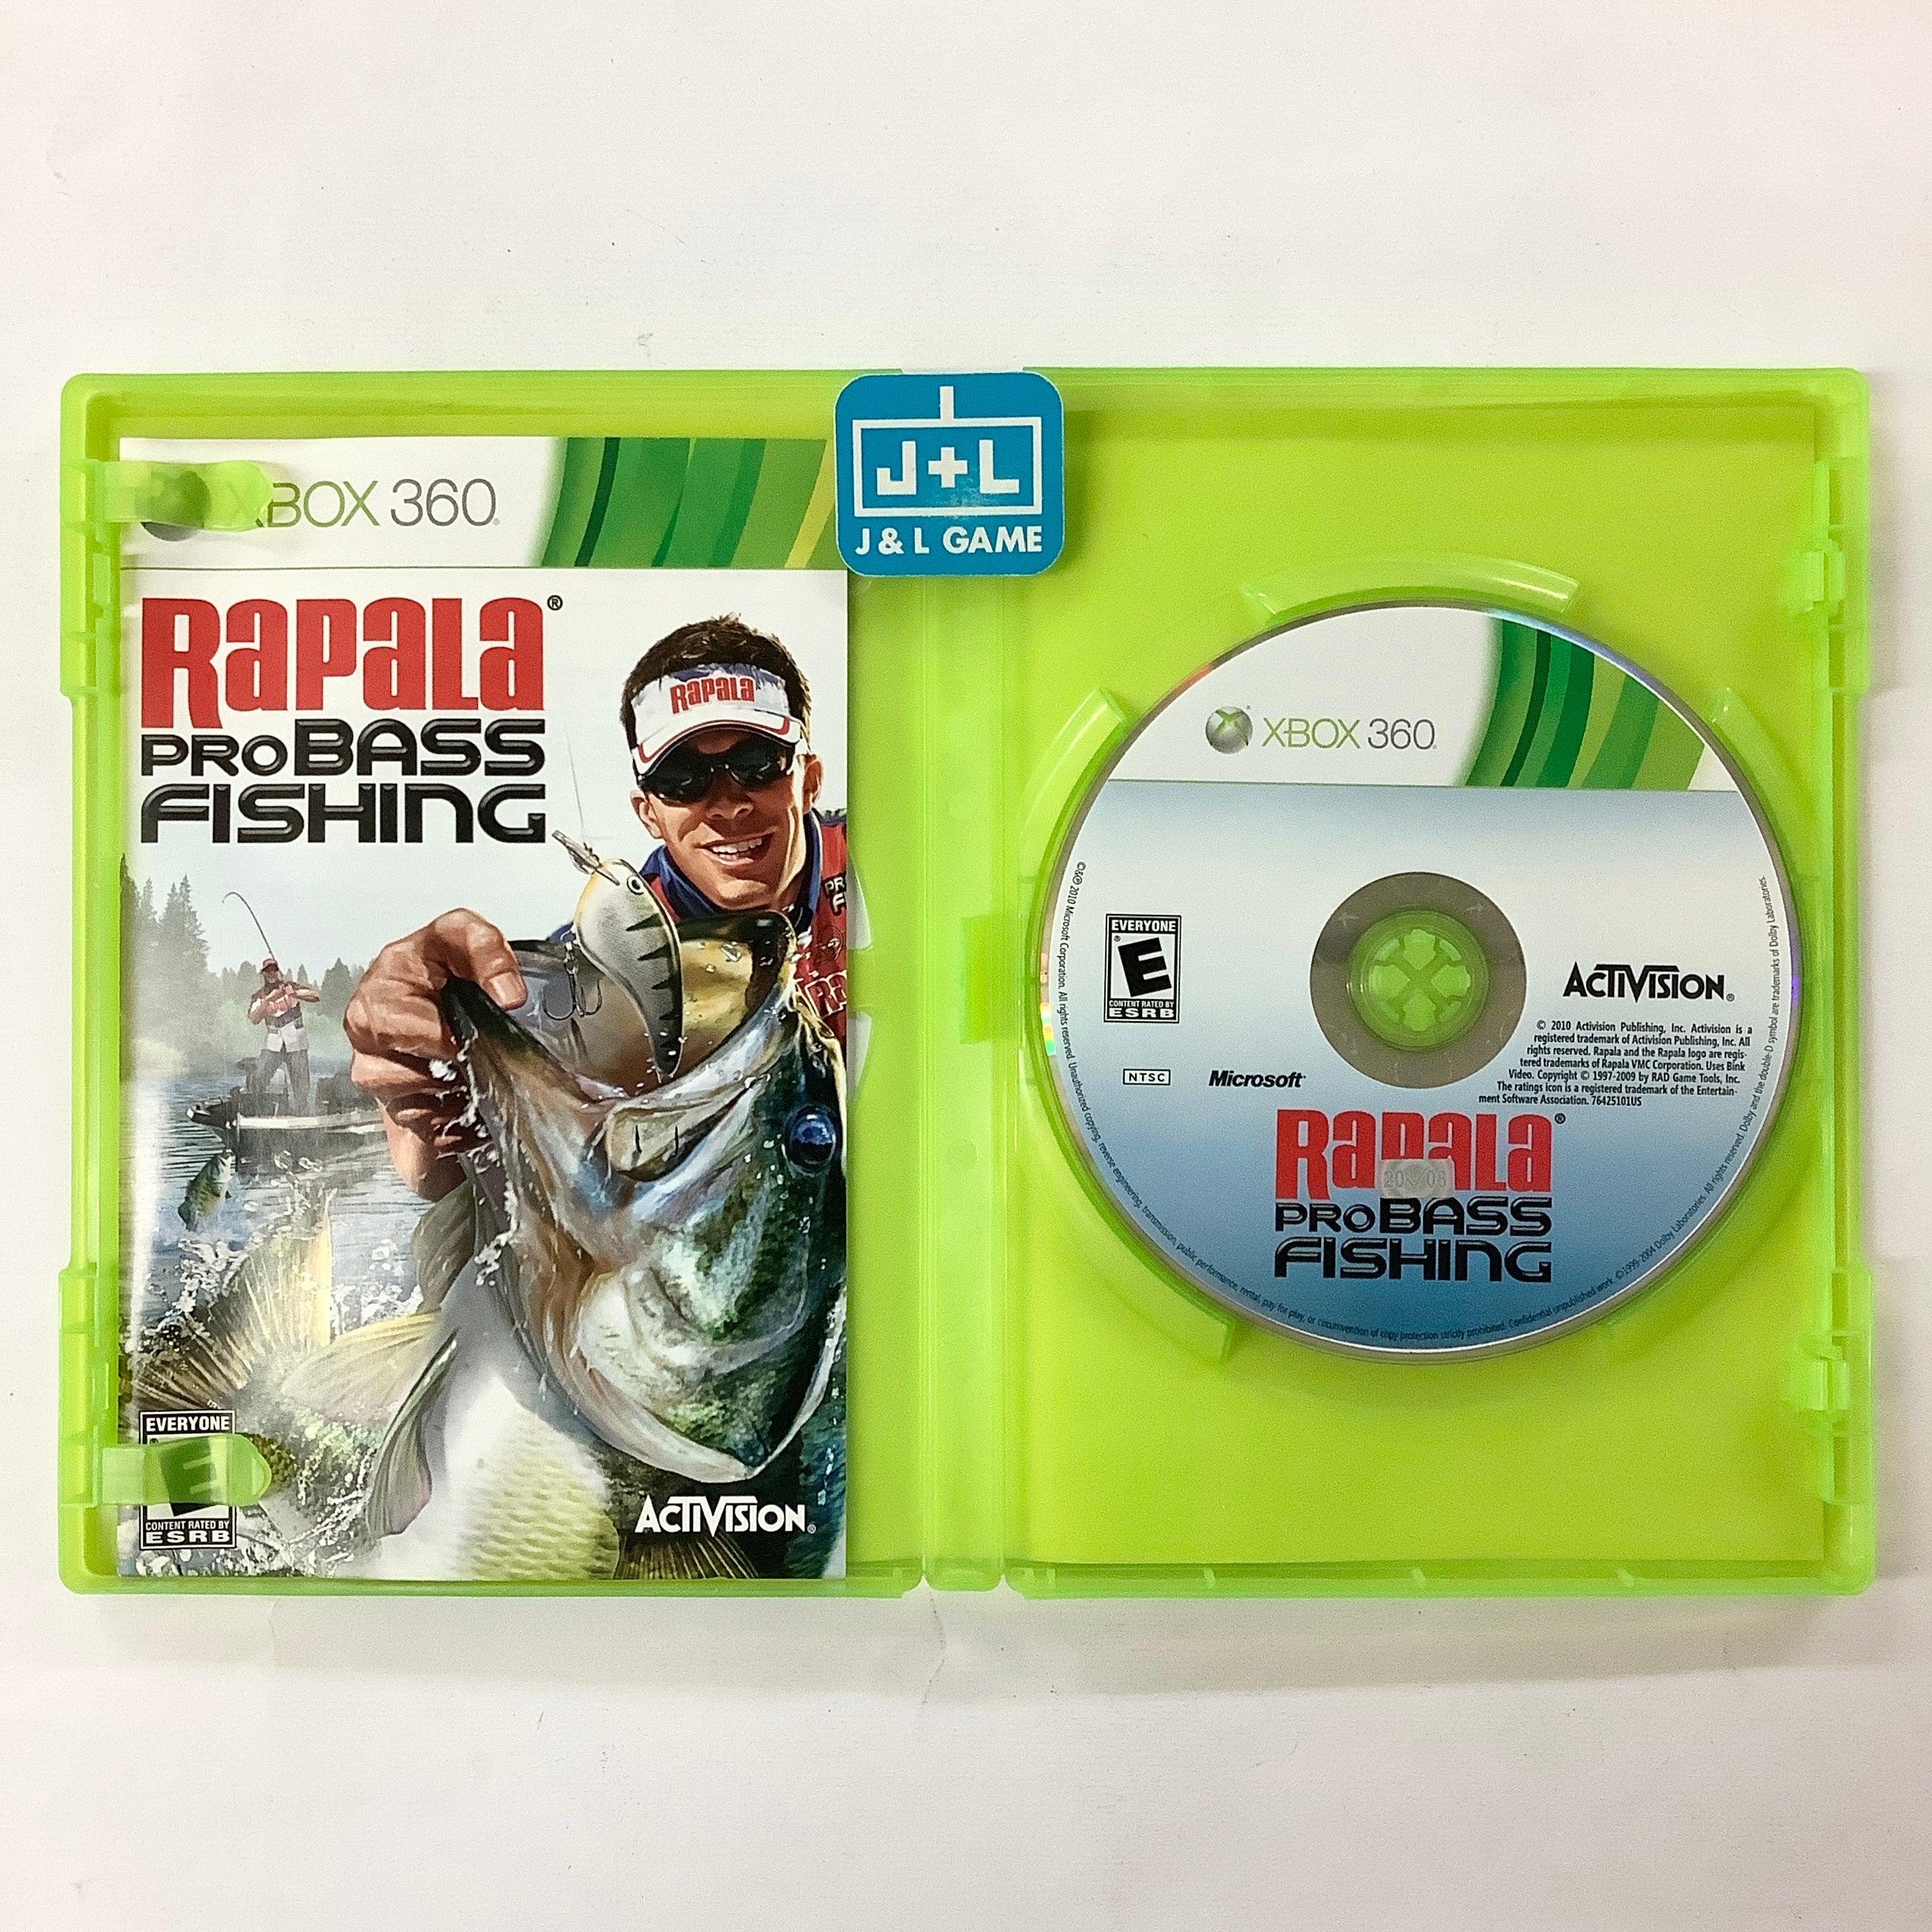 Rapala Pro Bass Fishing 2010 - Xbox 360 [Pre-Owned] Video Games Activision   